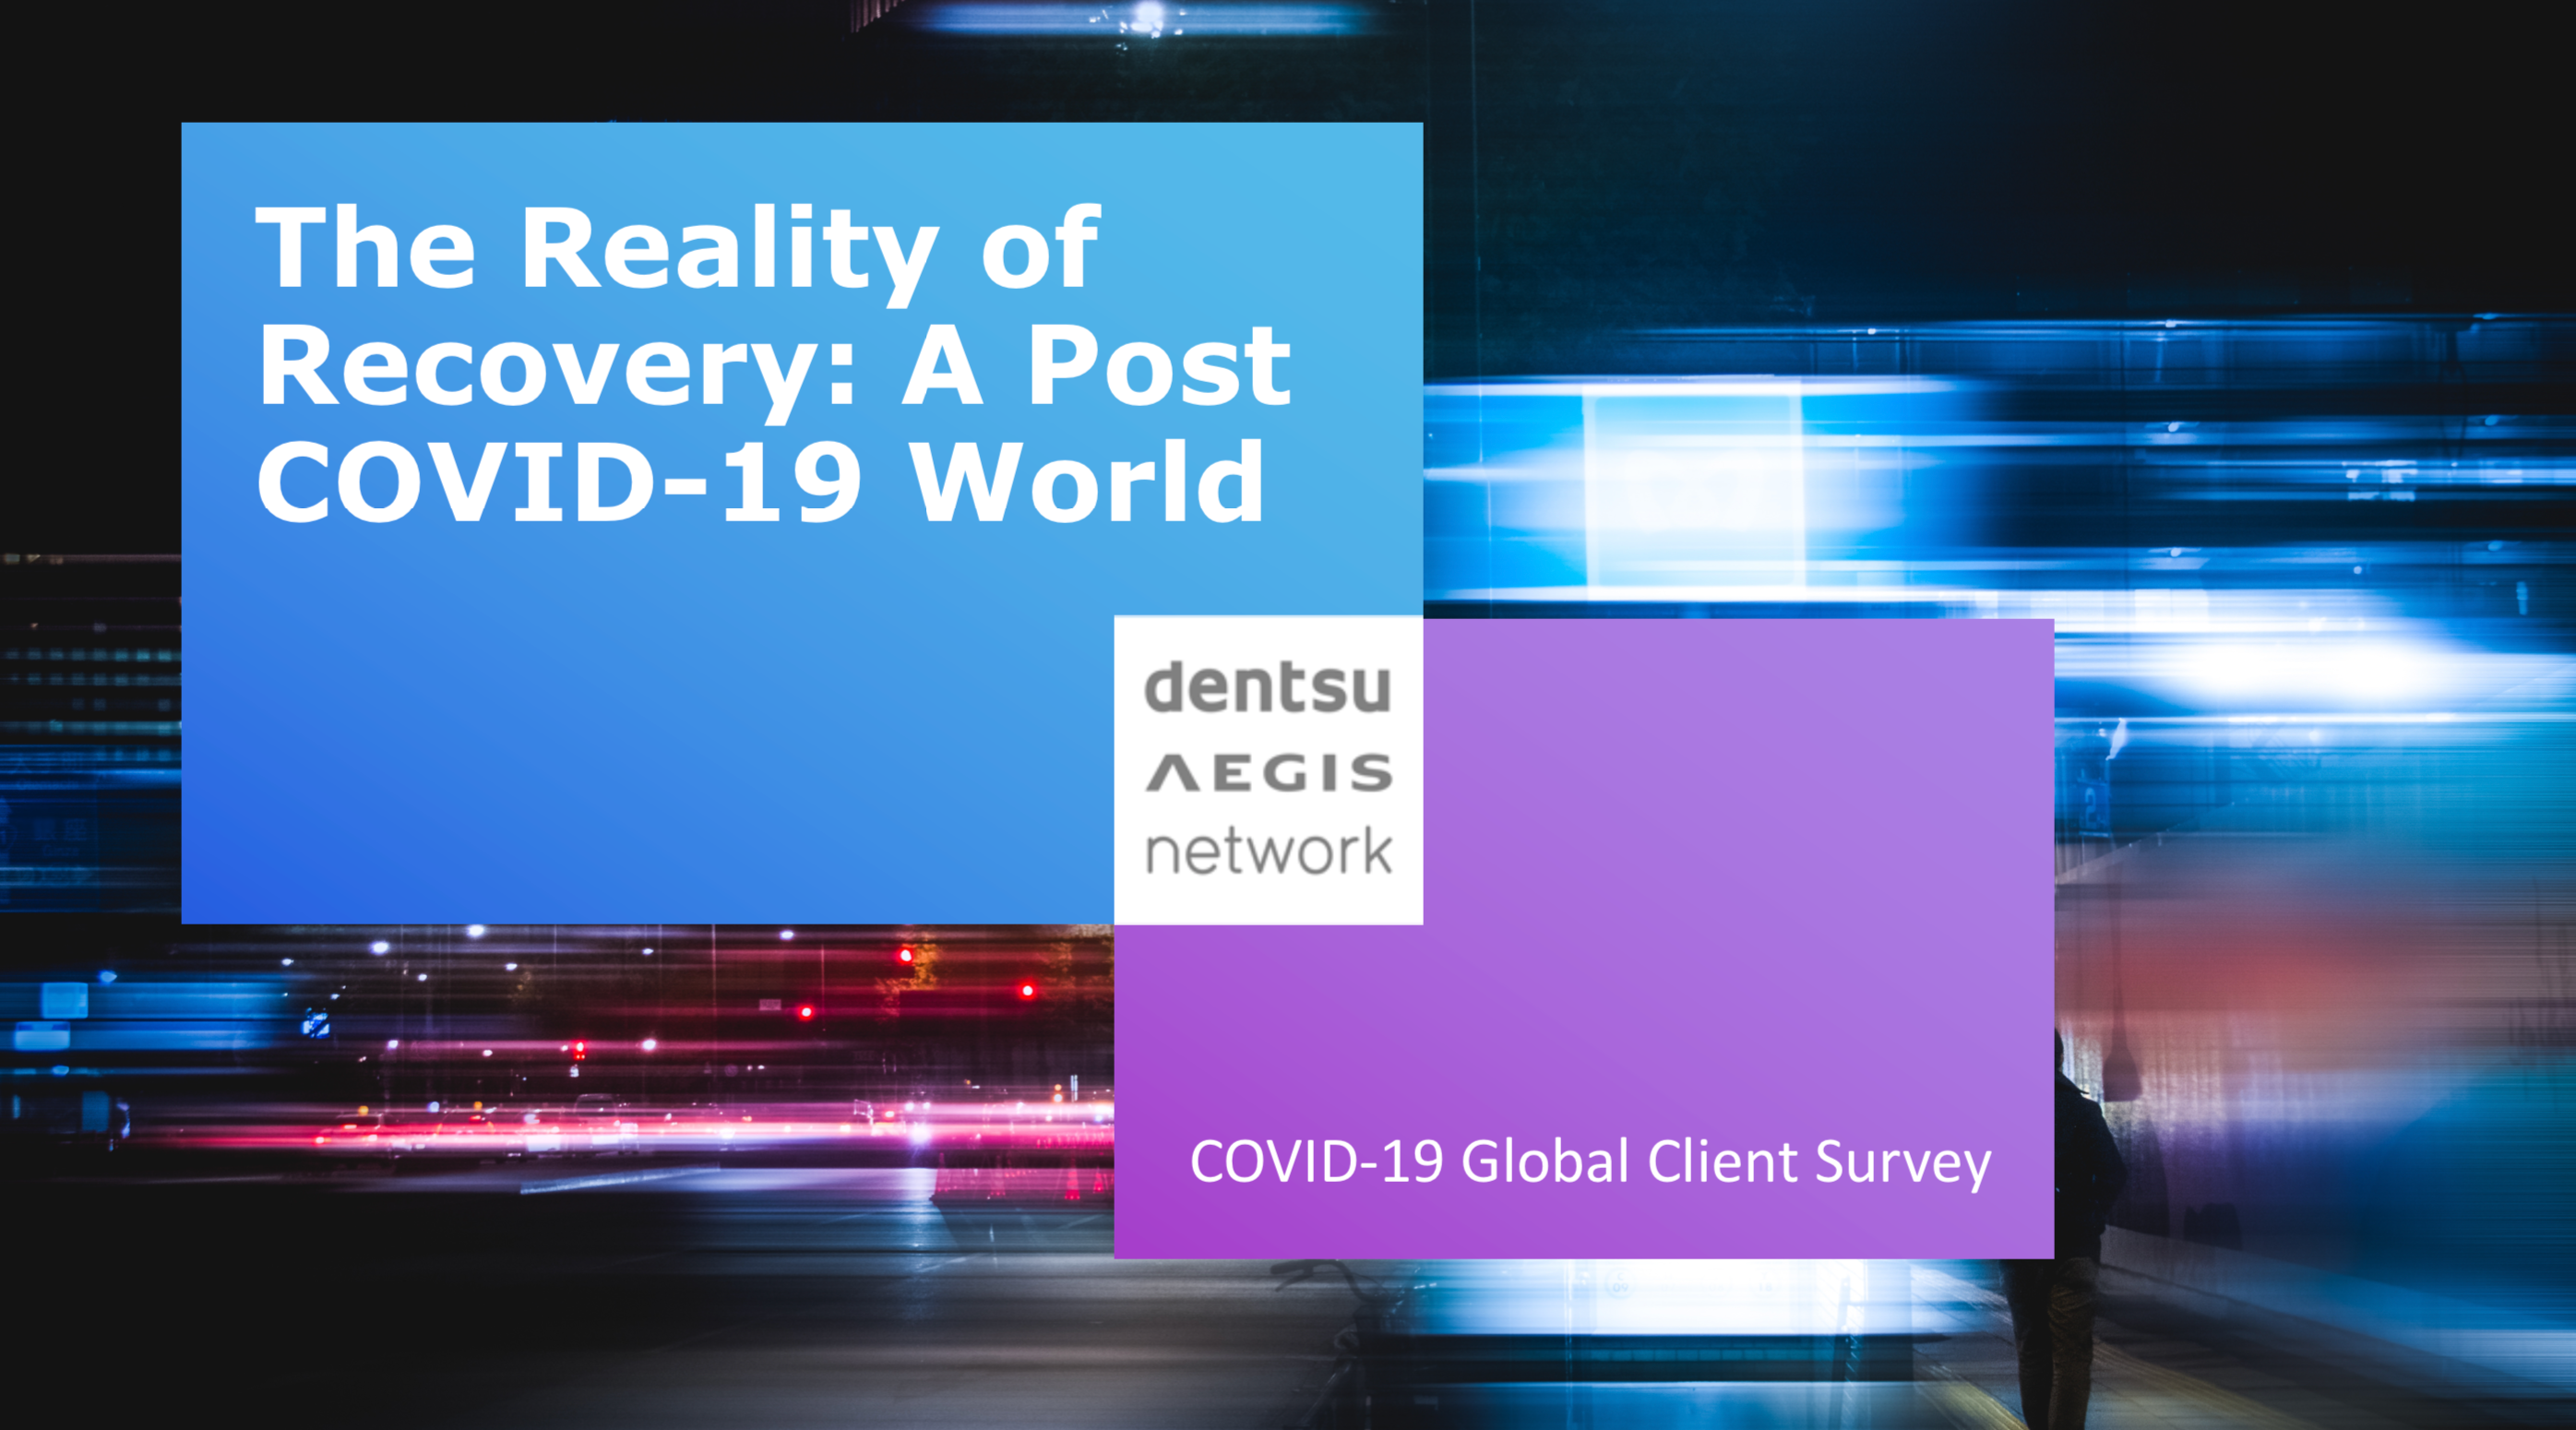 COVID-19 Global Client Survey iProspect